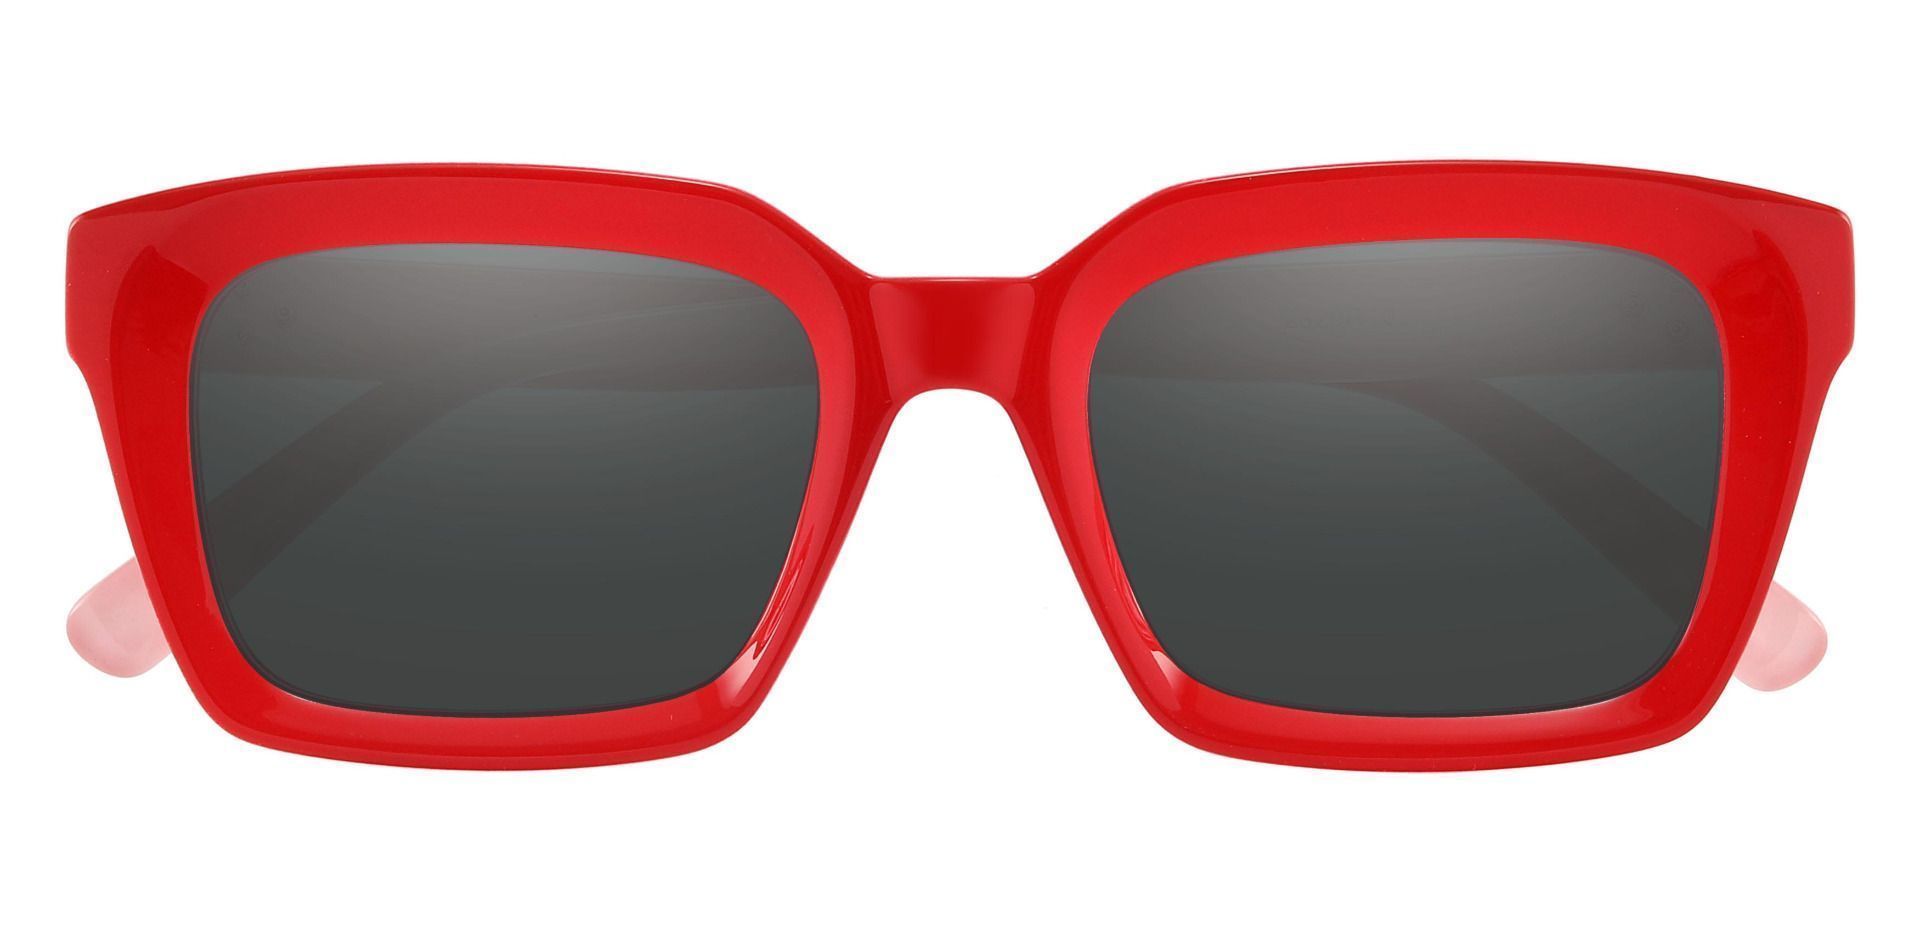 Unity Rectangle Lined Bifocal Sunglasses - Red Frame With Gray Lenses